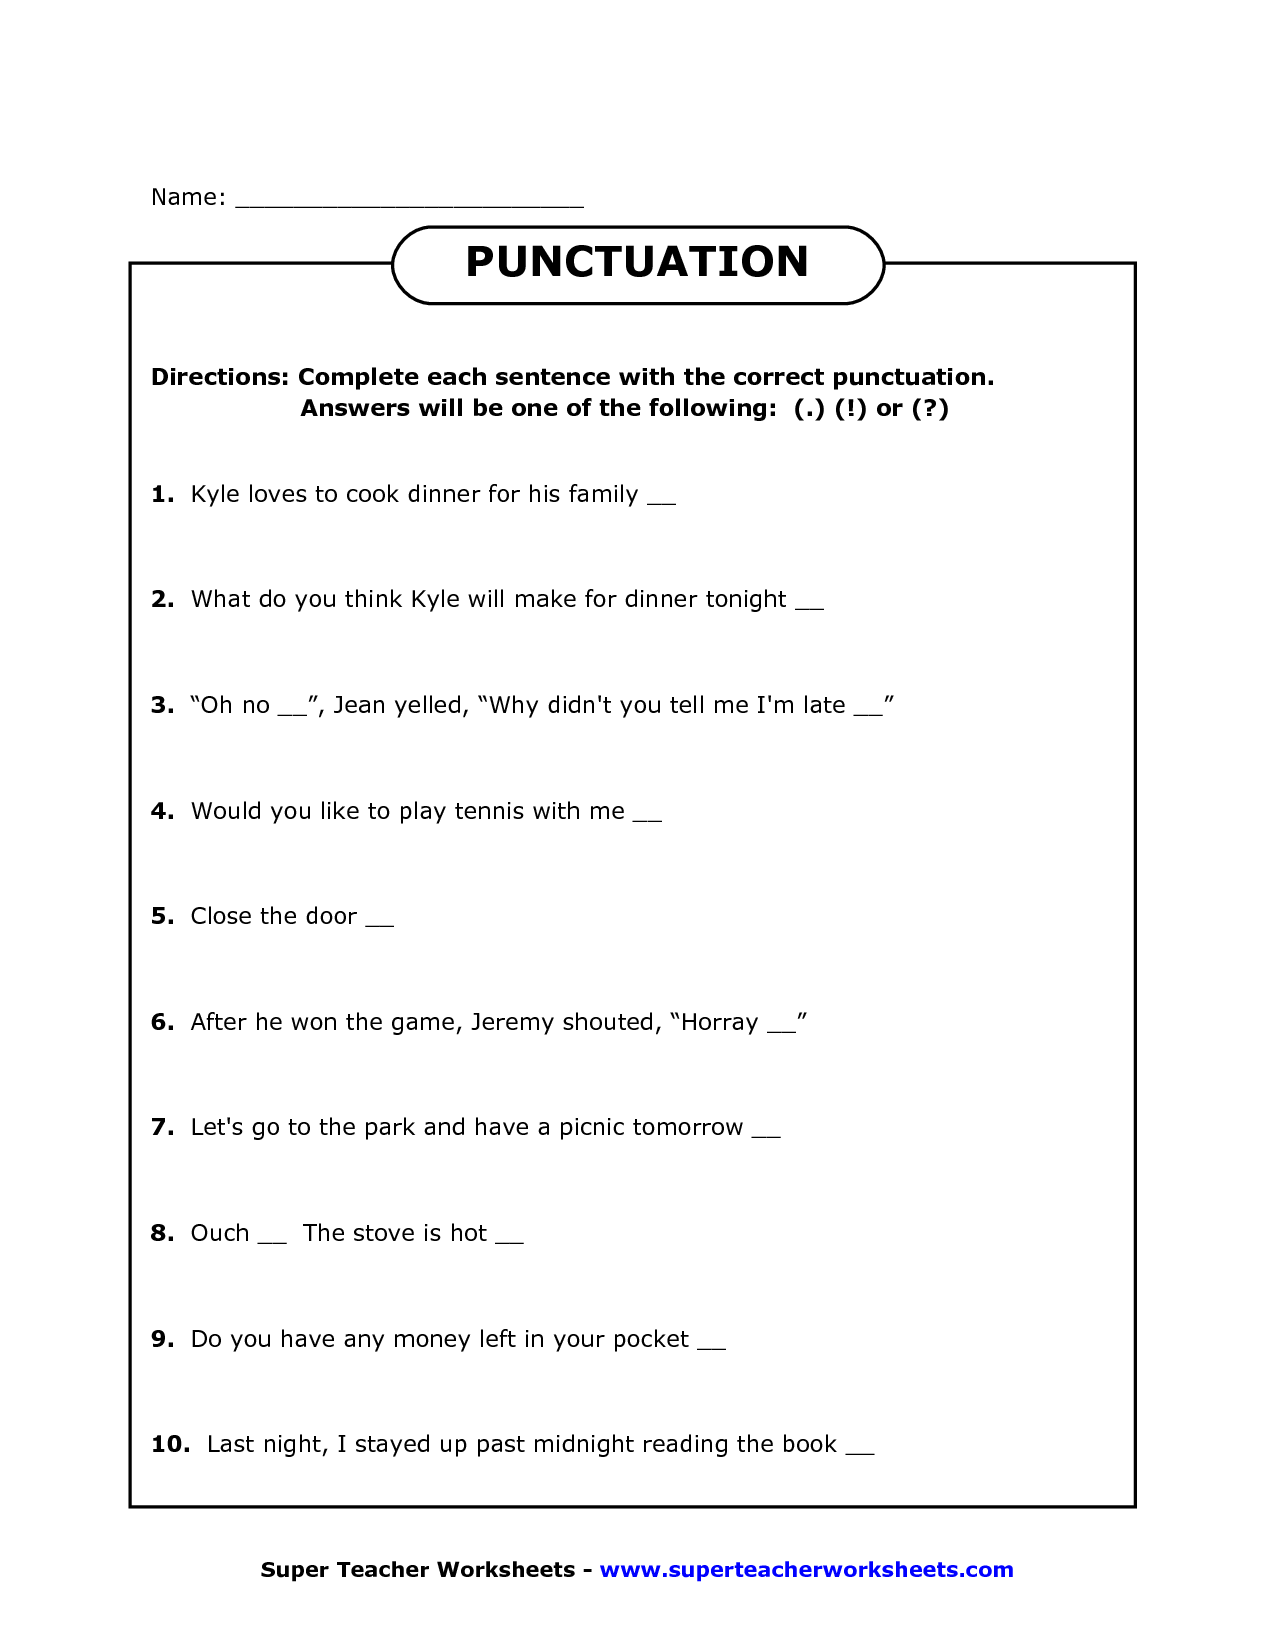 15 Best Images of Punctuation Worksheets Grade 4 - 2nd ...